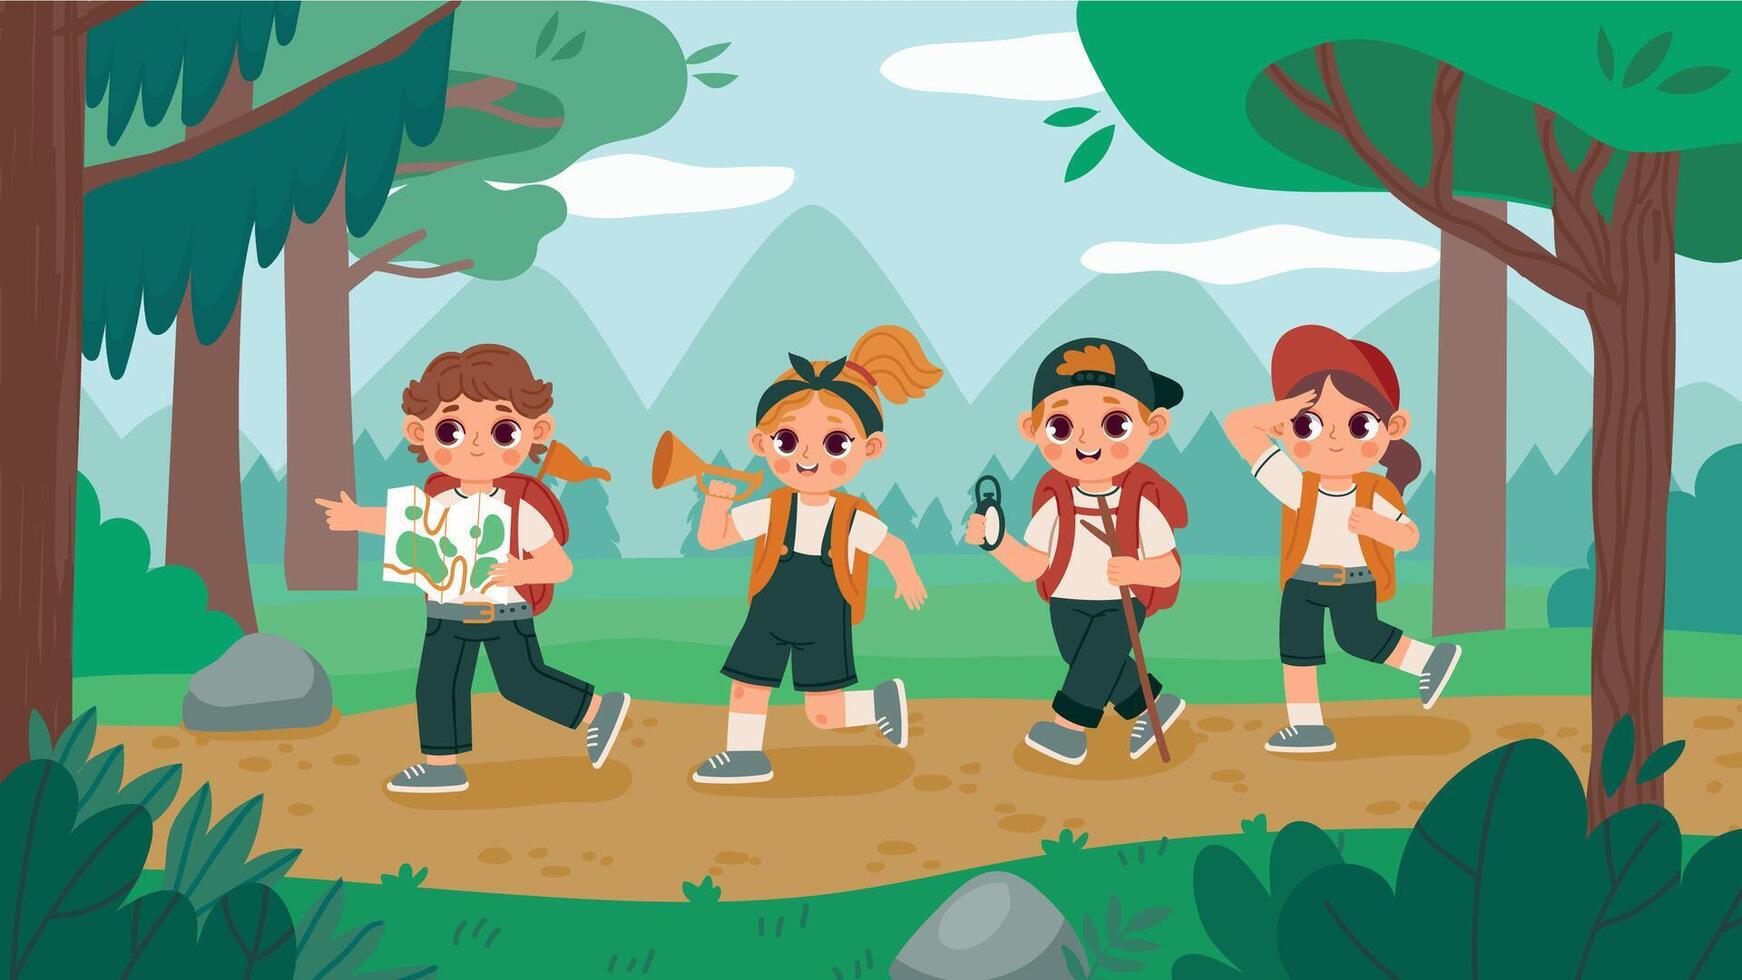 Kids on a hike. Cartoon kids walking in wood, summer journey and adventure trip with backpacks. Vector scout kids survive in nature